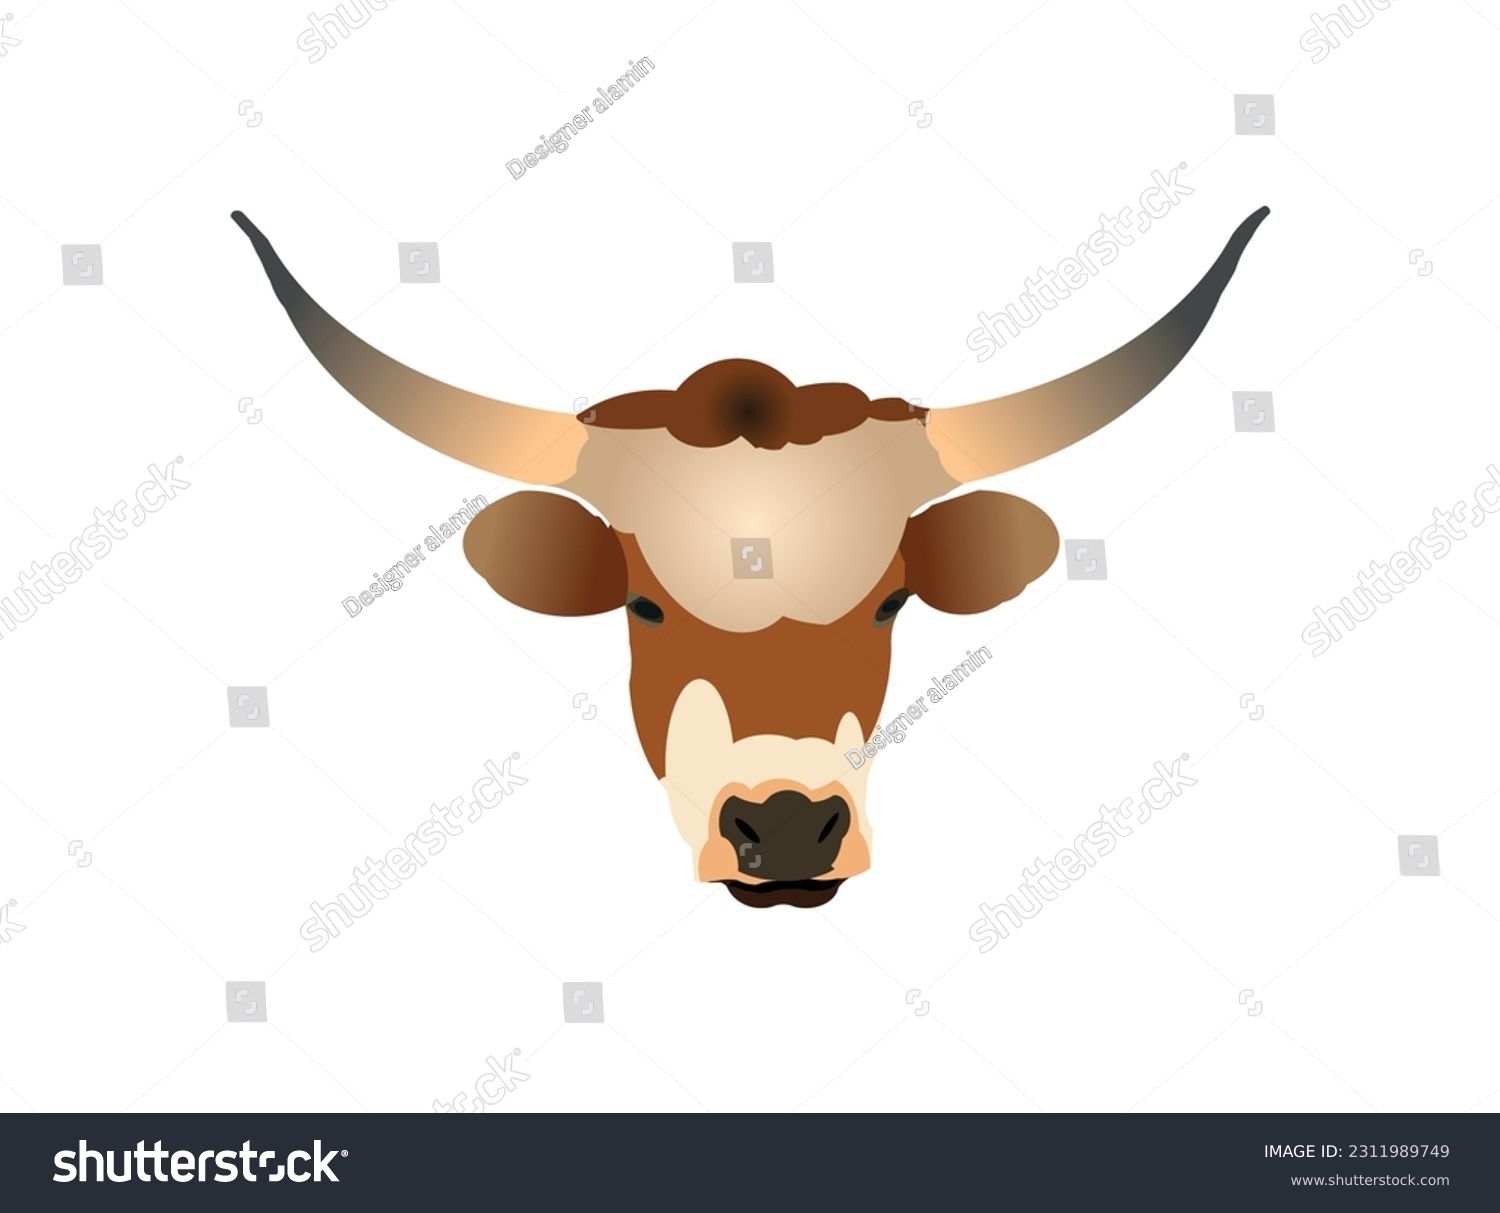 SVG of Bull Vectors and Illustrations for Free Download, Angry Bull Vector Royalty Free SVG, Cliparts, Vectors, And Stock Illustration, Cows Lines Hd Transparent, Simple Line Cow Decoration Vector. svg